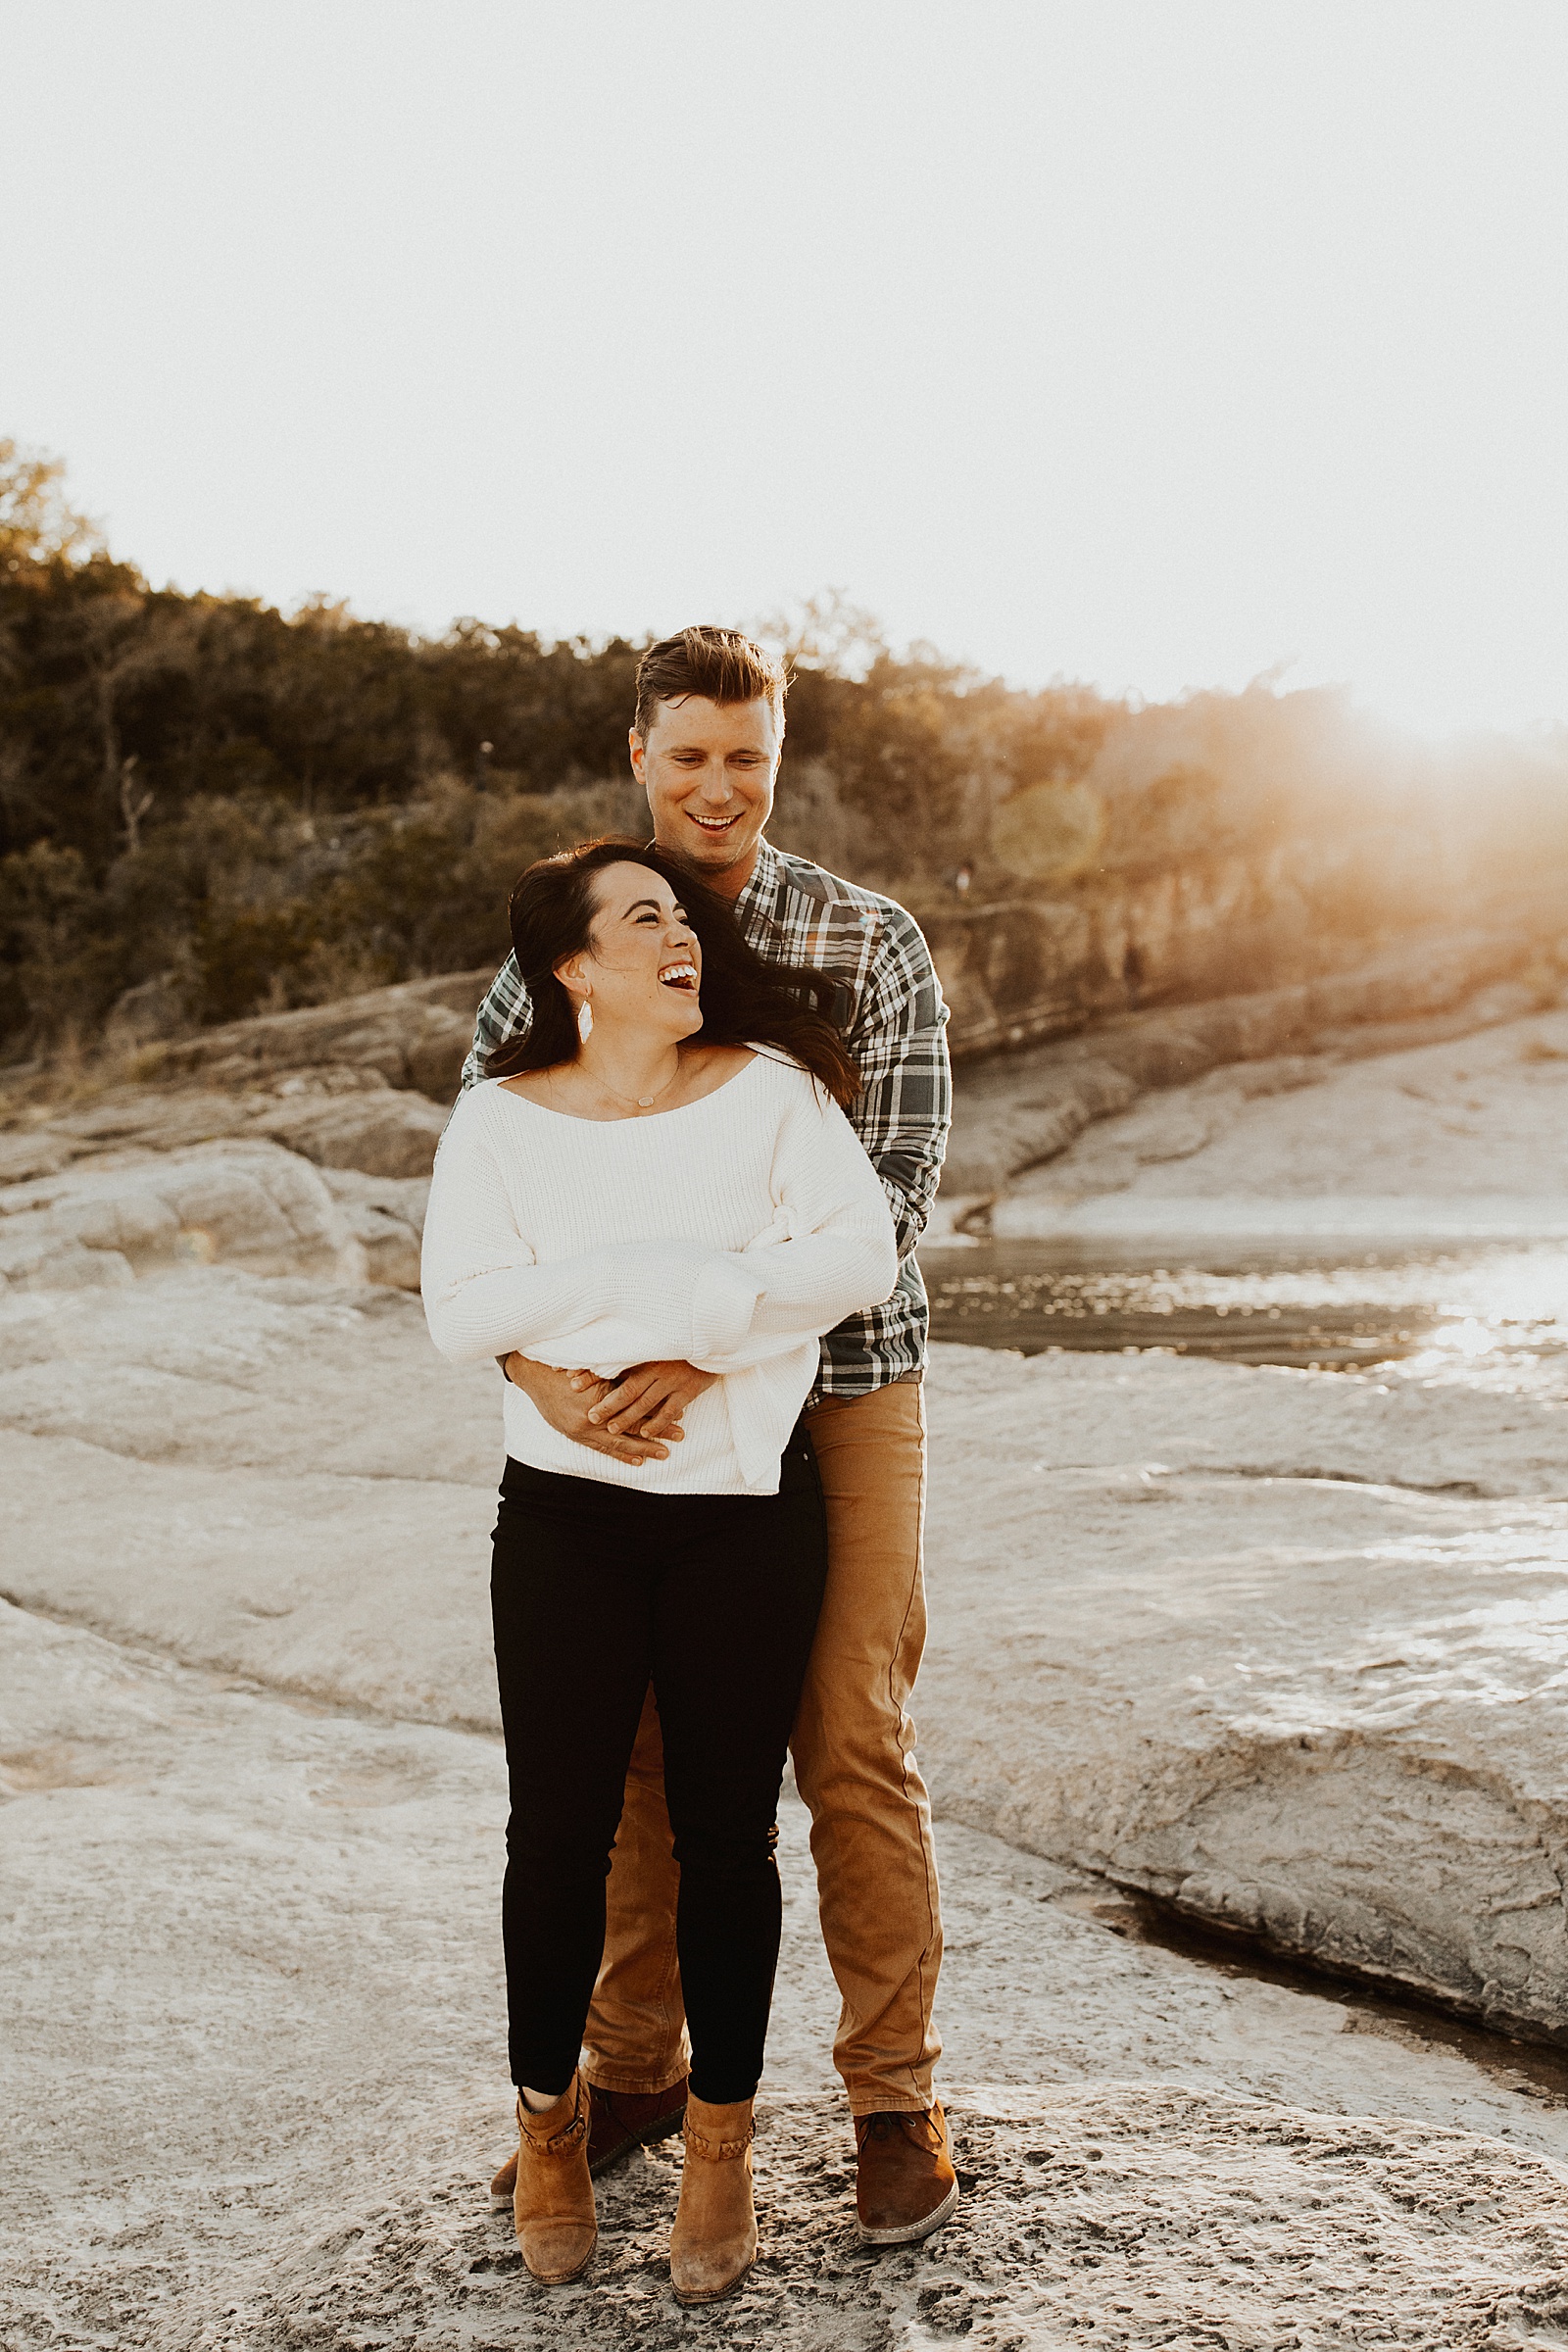 These two enjoyed some pizza and champagne for their Pedernales Falls engagement session in Austin, TX.